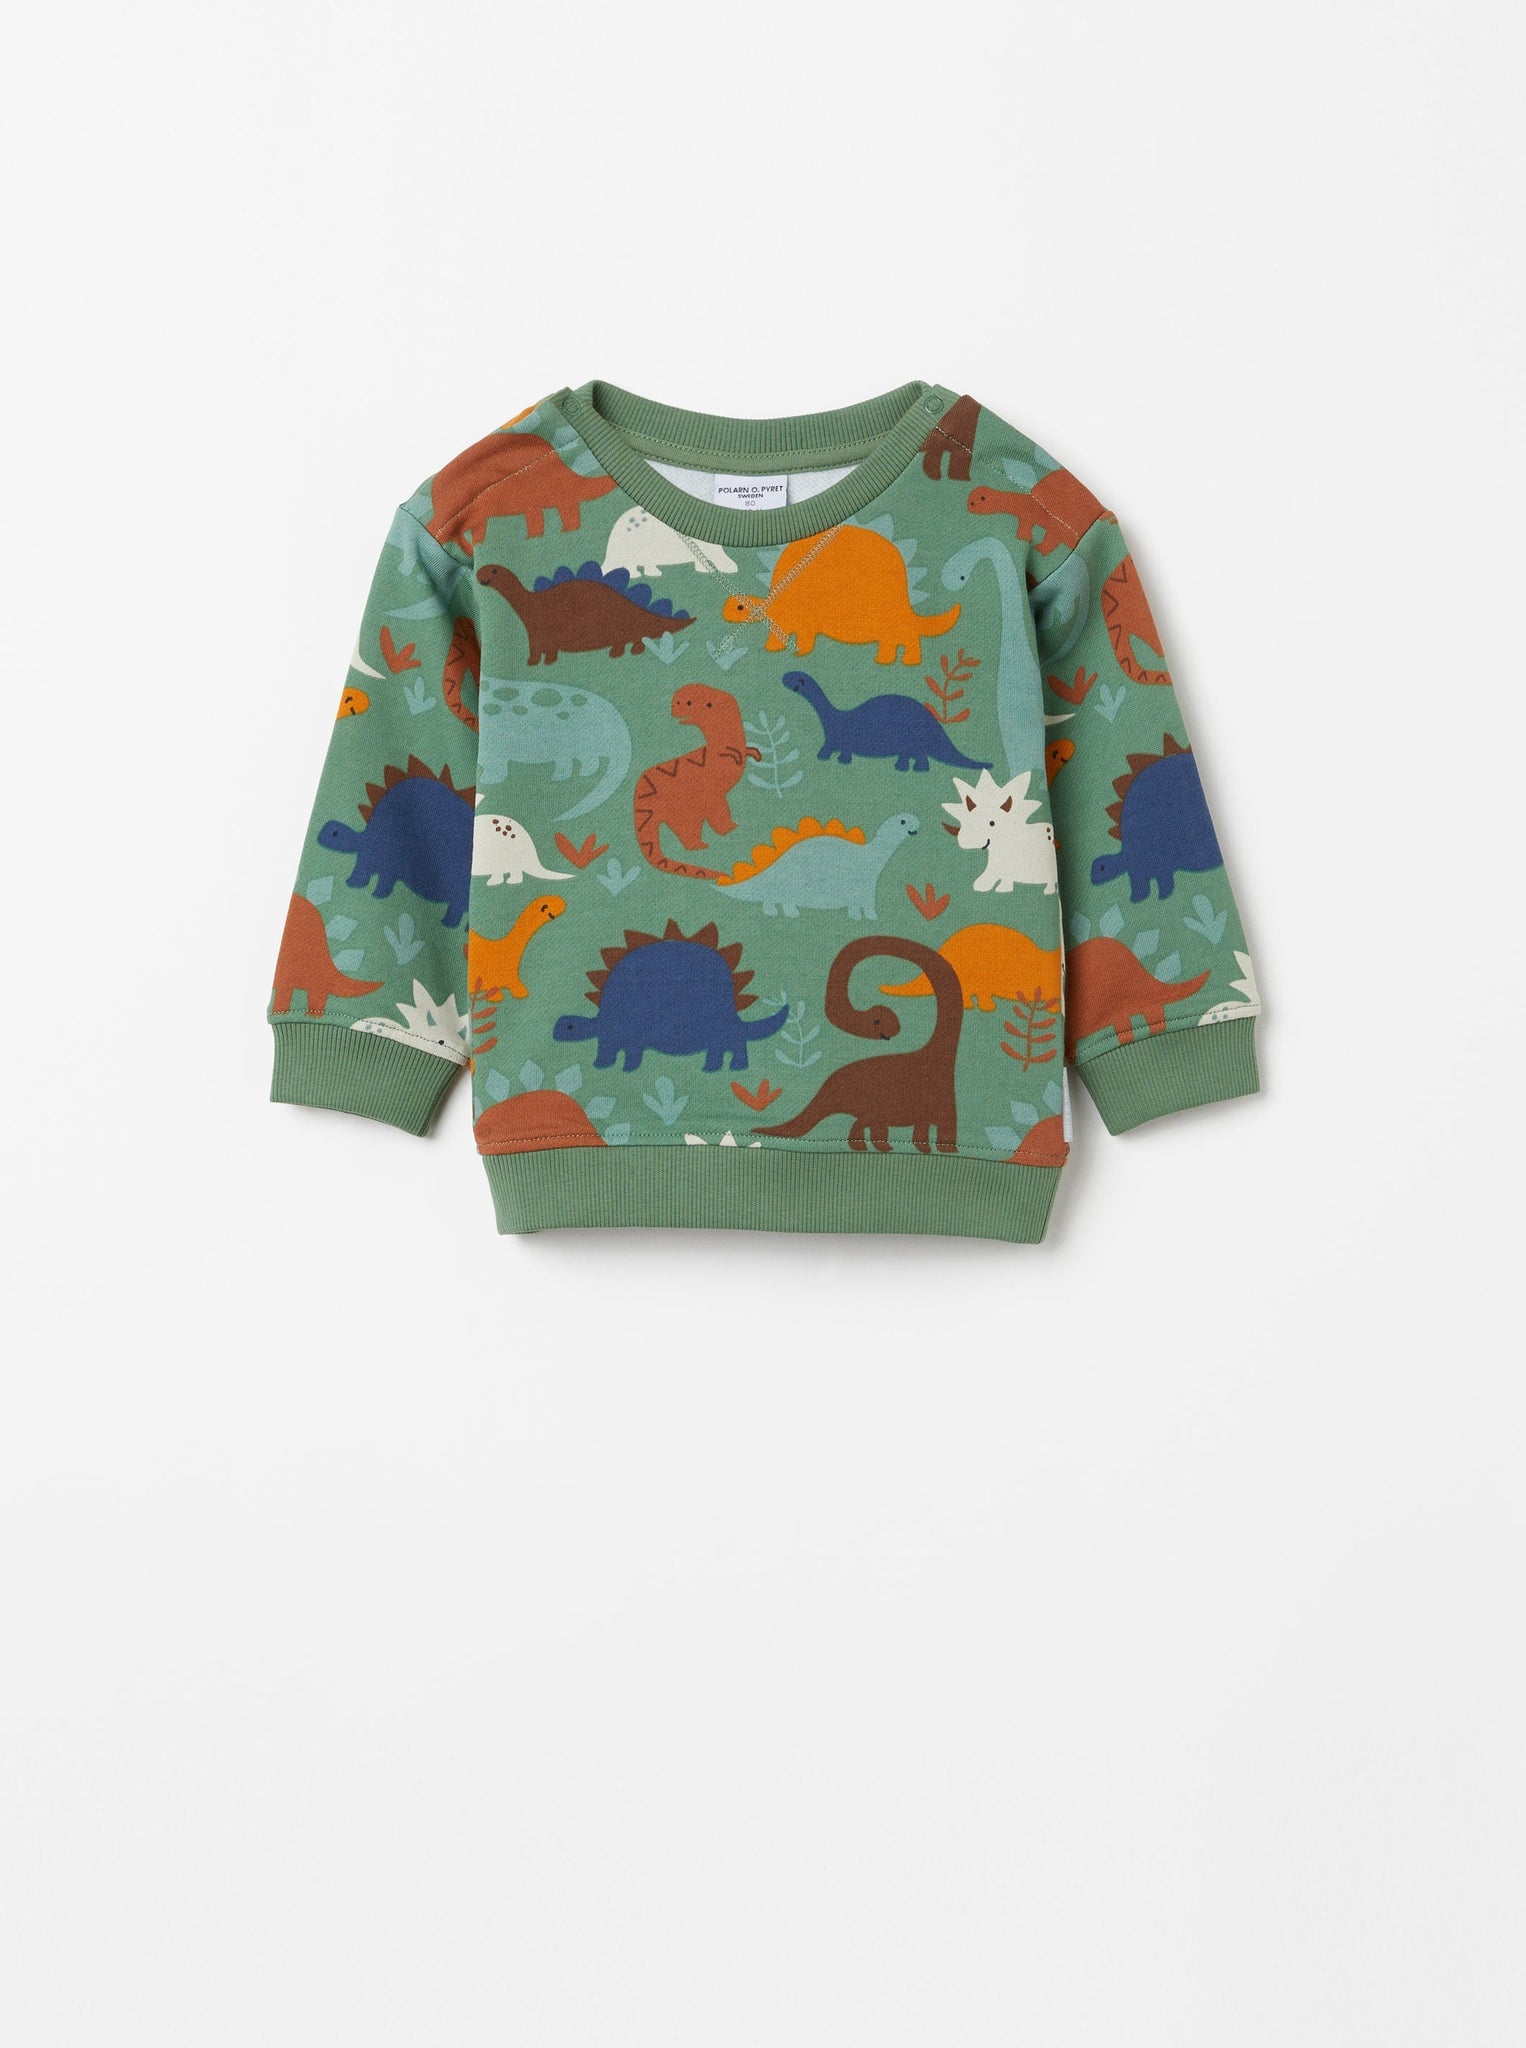 Dinosaur Print Baby Sweatshirt from the Polarn O. Pyret Kidswear collection. The best ethical kids clothes